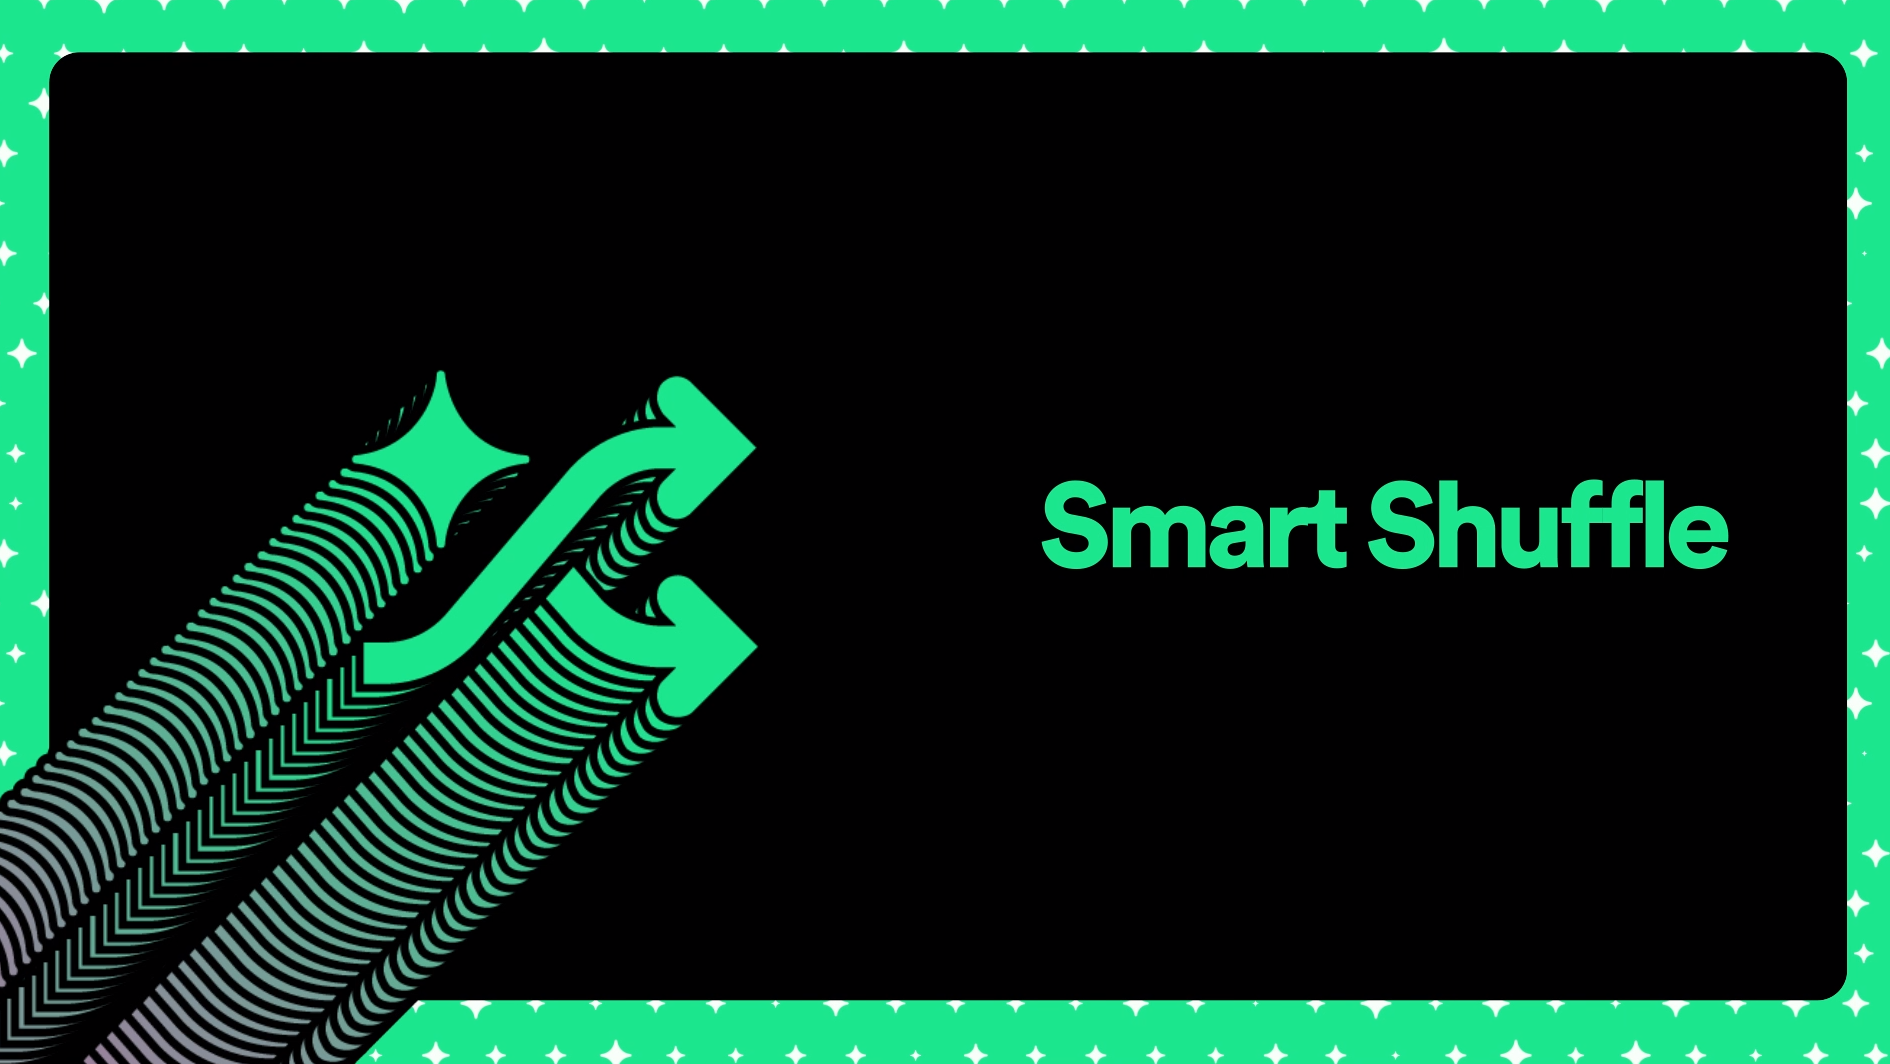 Create Spotify playlists with perfect song recommendations using new Smart Shuffle feature